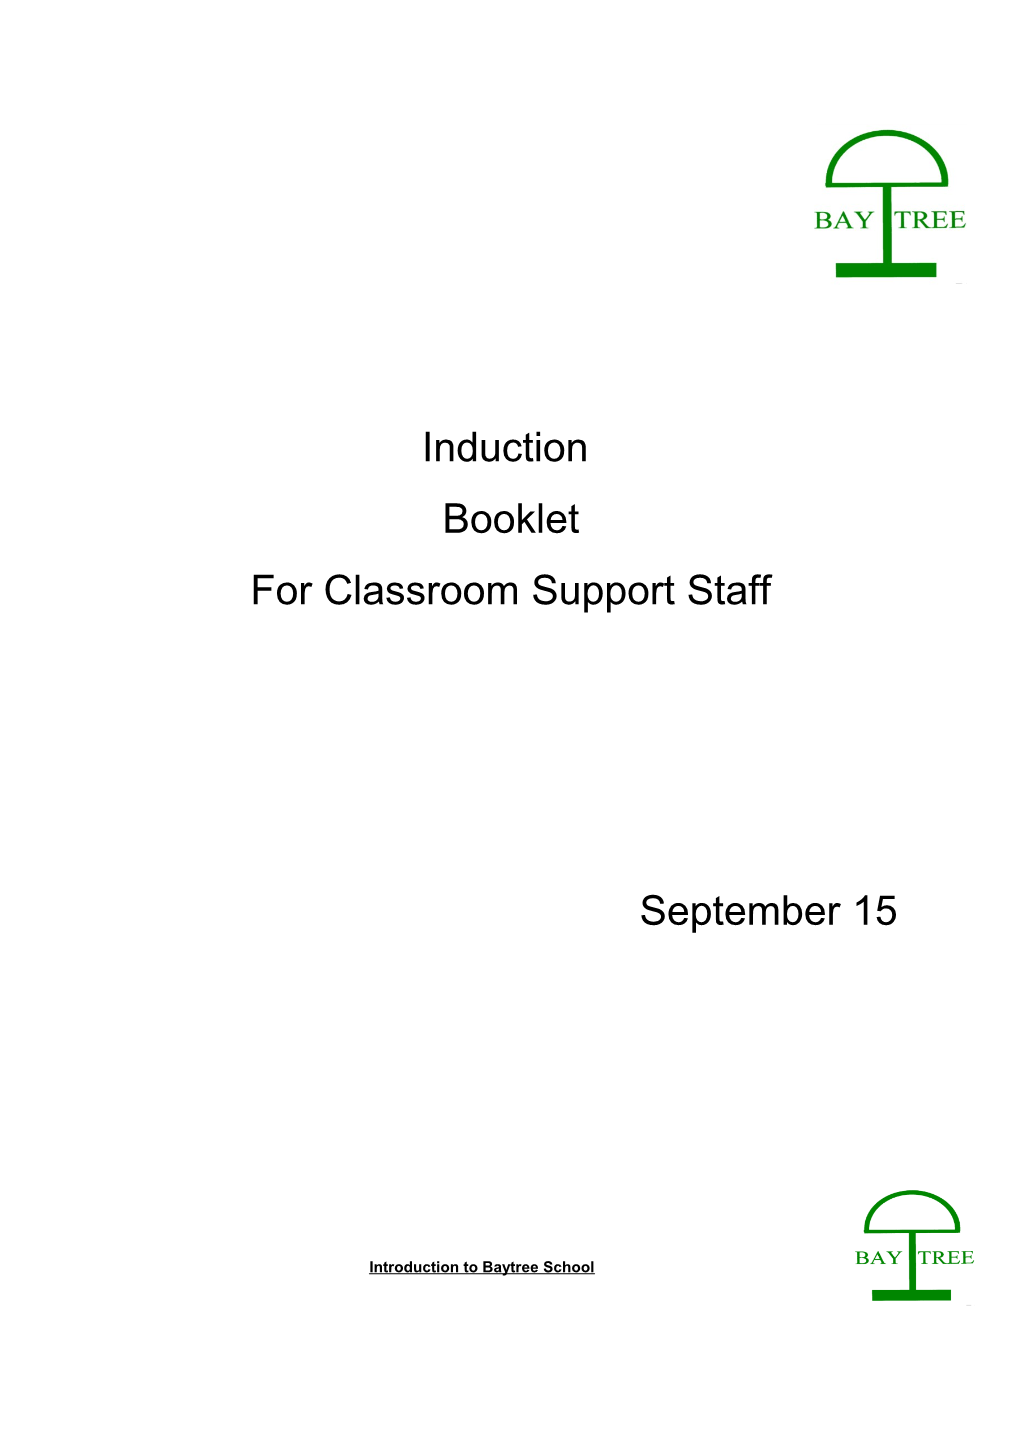 For Classroom Support Staff